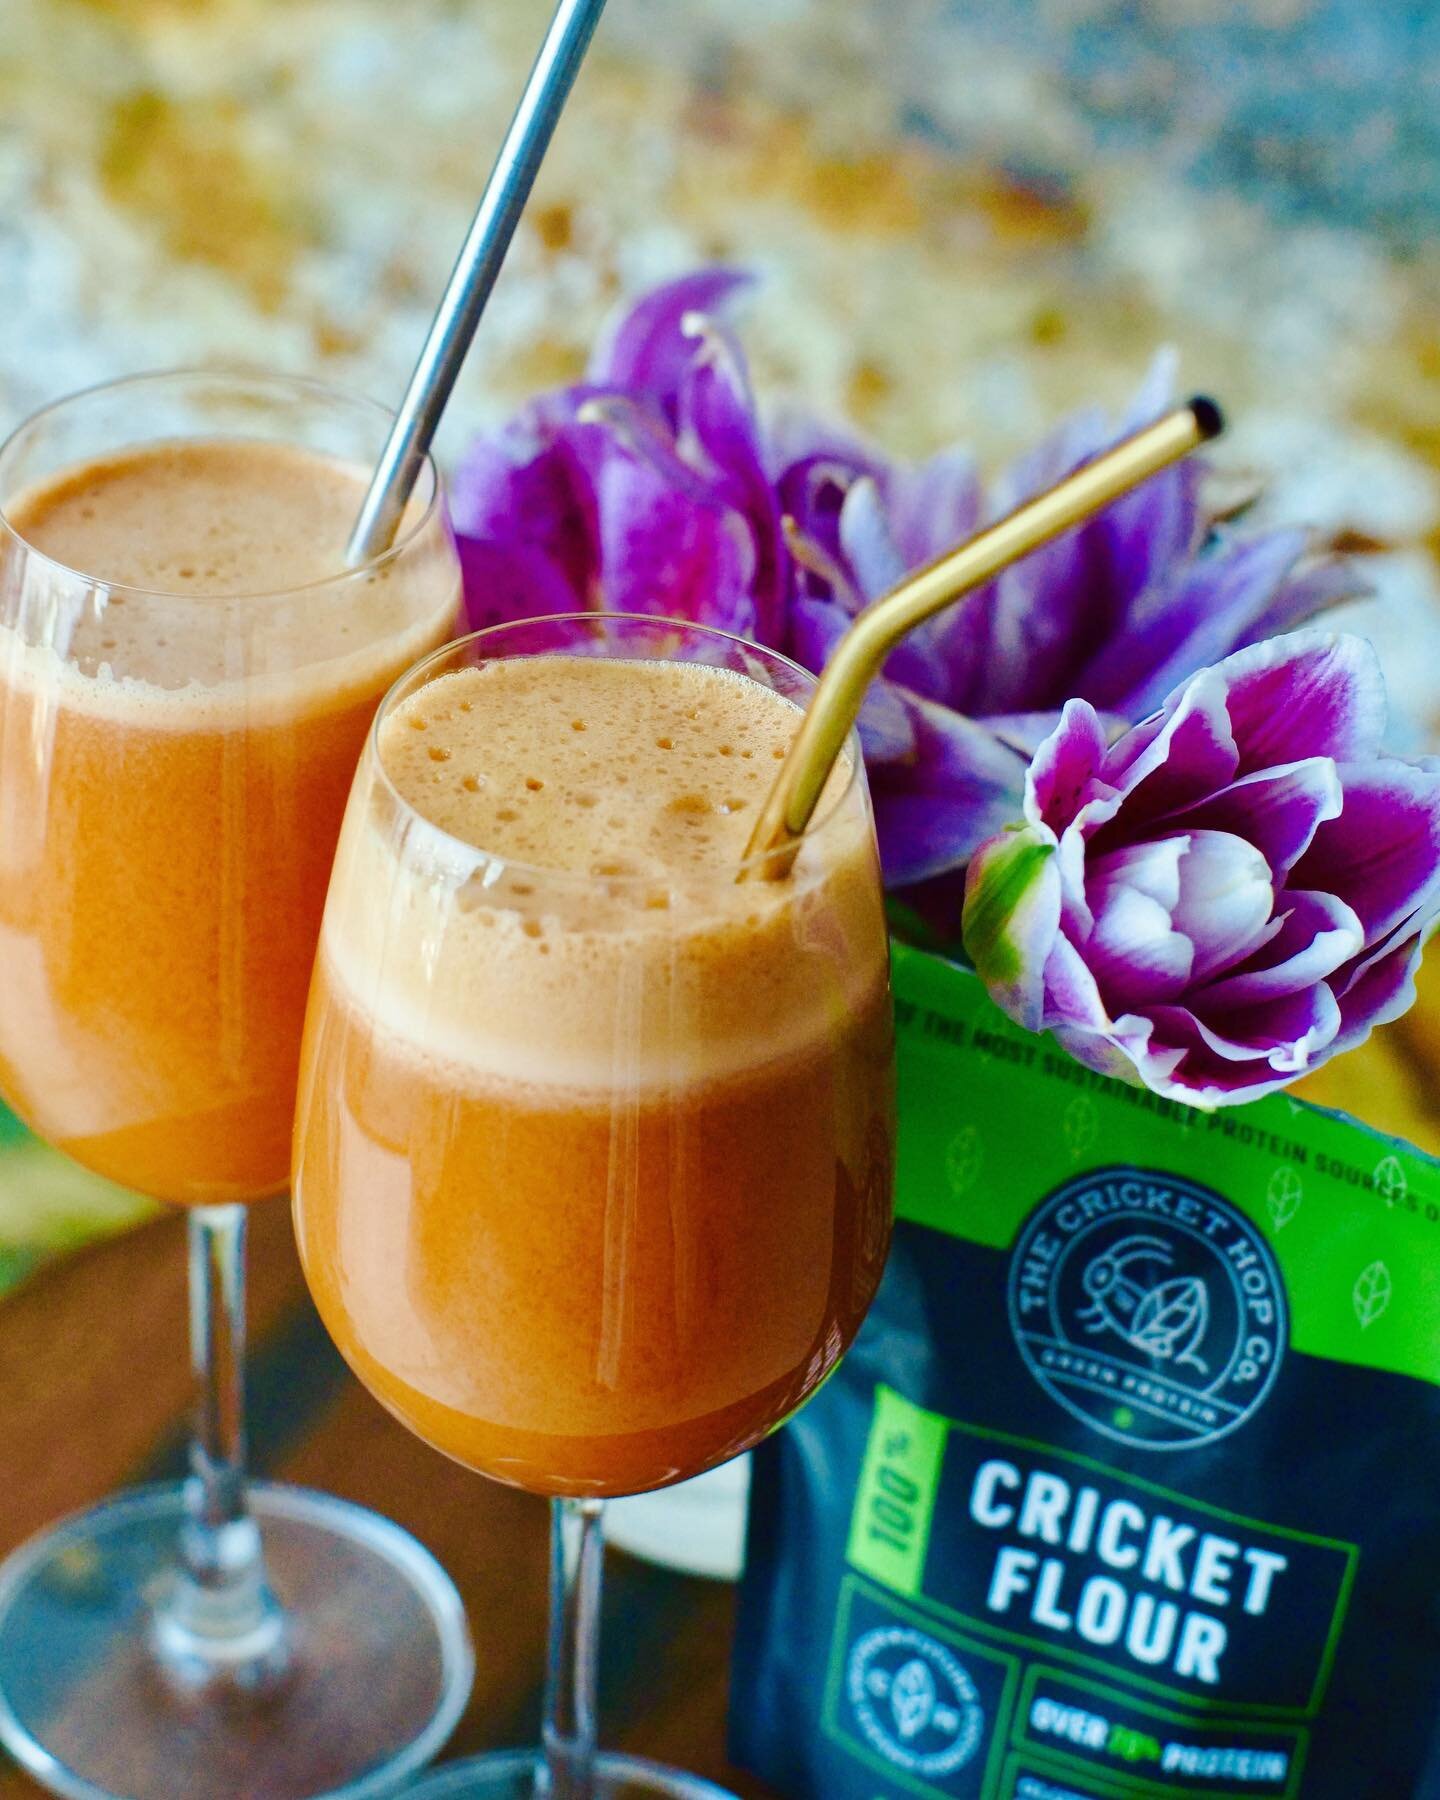 Crickets for any occasion 🍸🍹🍾🥂🦗🍎🥕🍏 Juice - Apples, carrots, cricket flour and ginger for a little kick! 😊 
#crickethop #edibleinsects #juice #healthyfood #lifestyle #superfoods #immunebooster #immunesupport #natural #futurefocused #greenprot